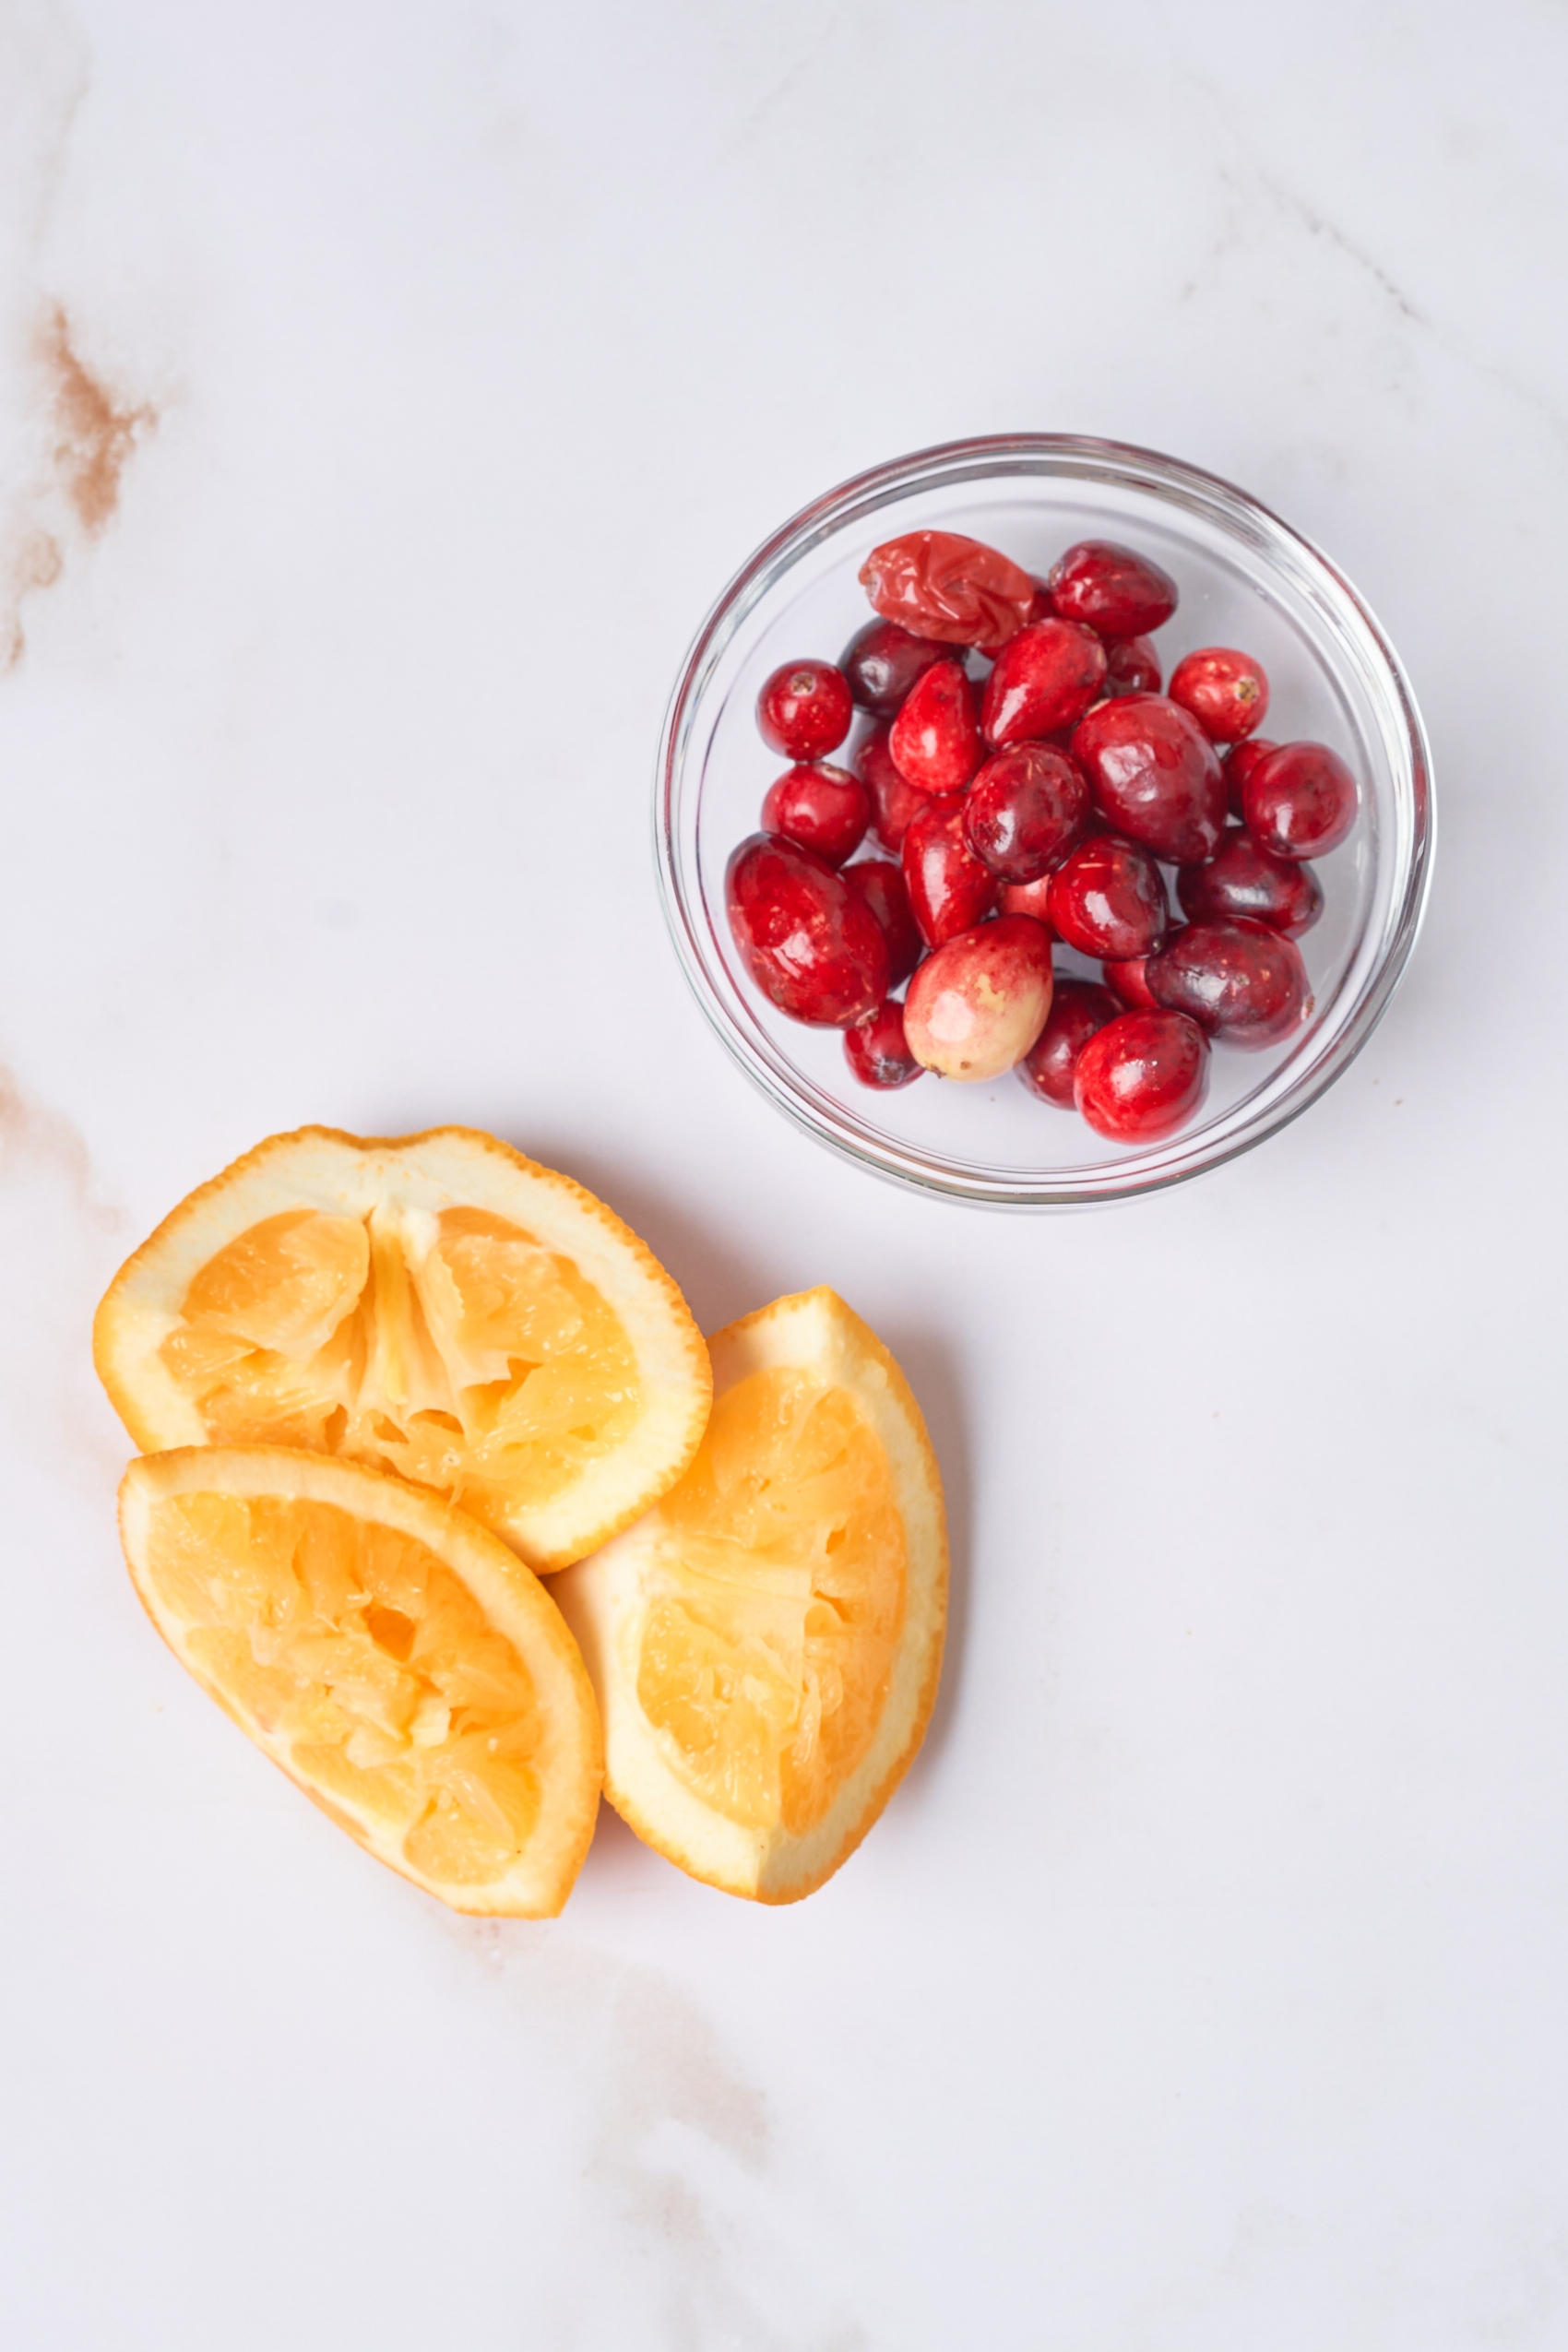 three slices of squeezed oranges and a bowl of fresh cranberries